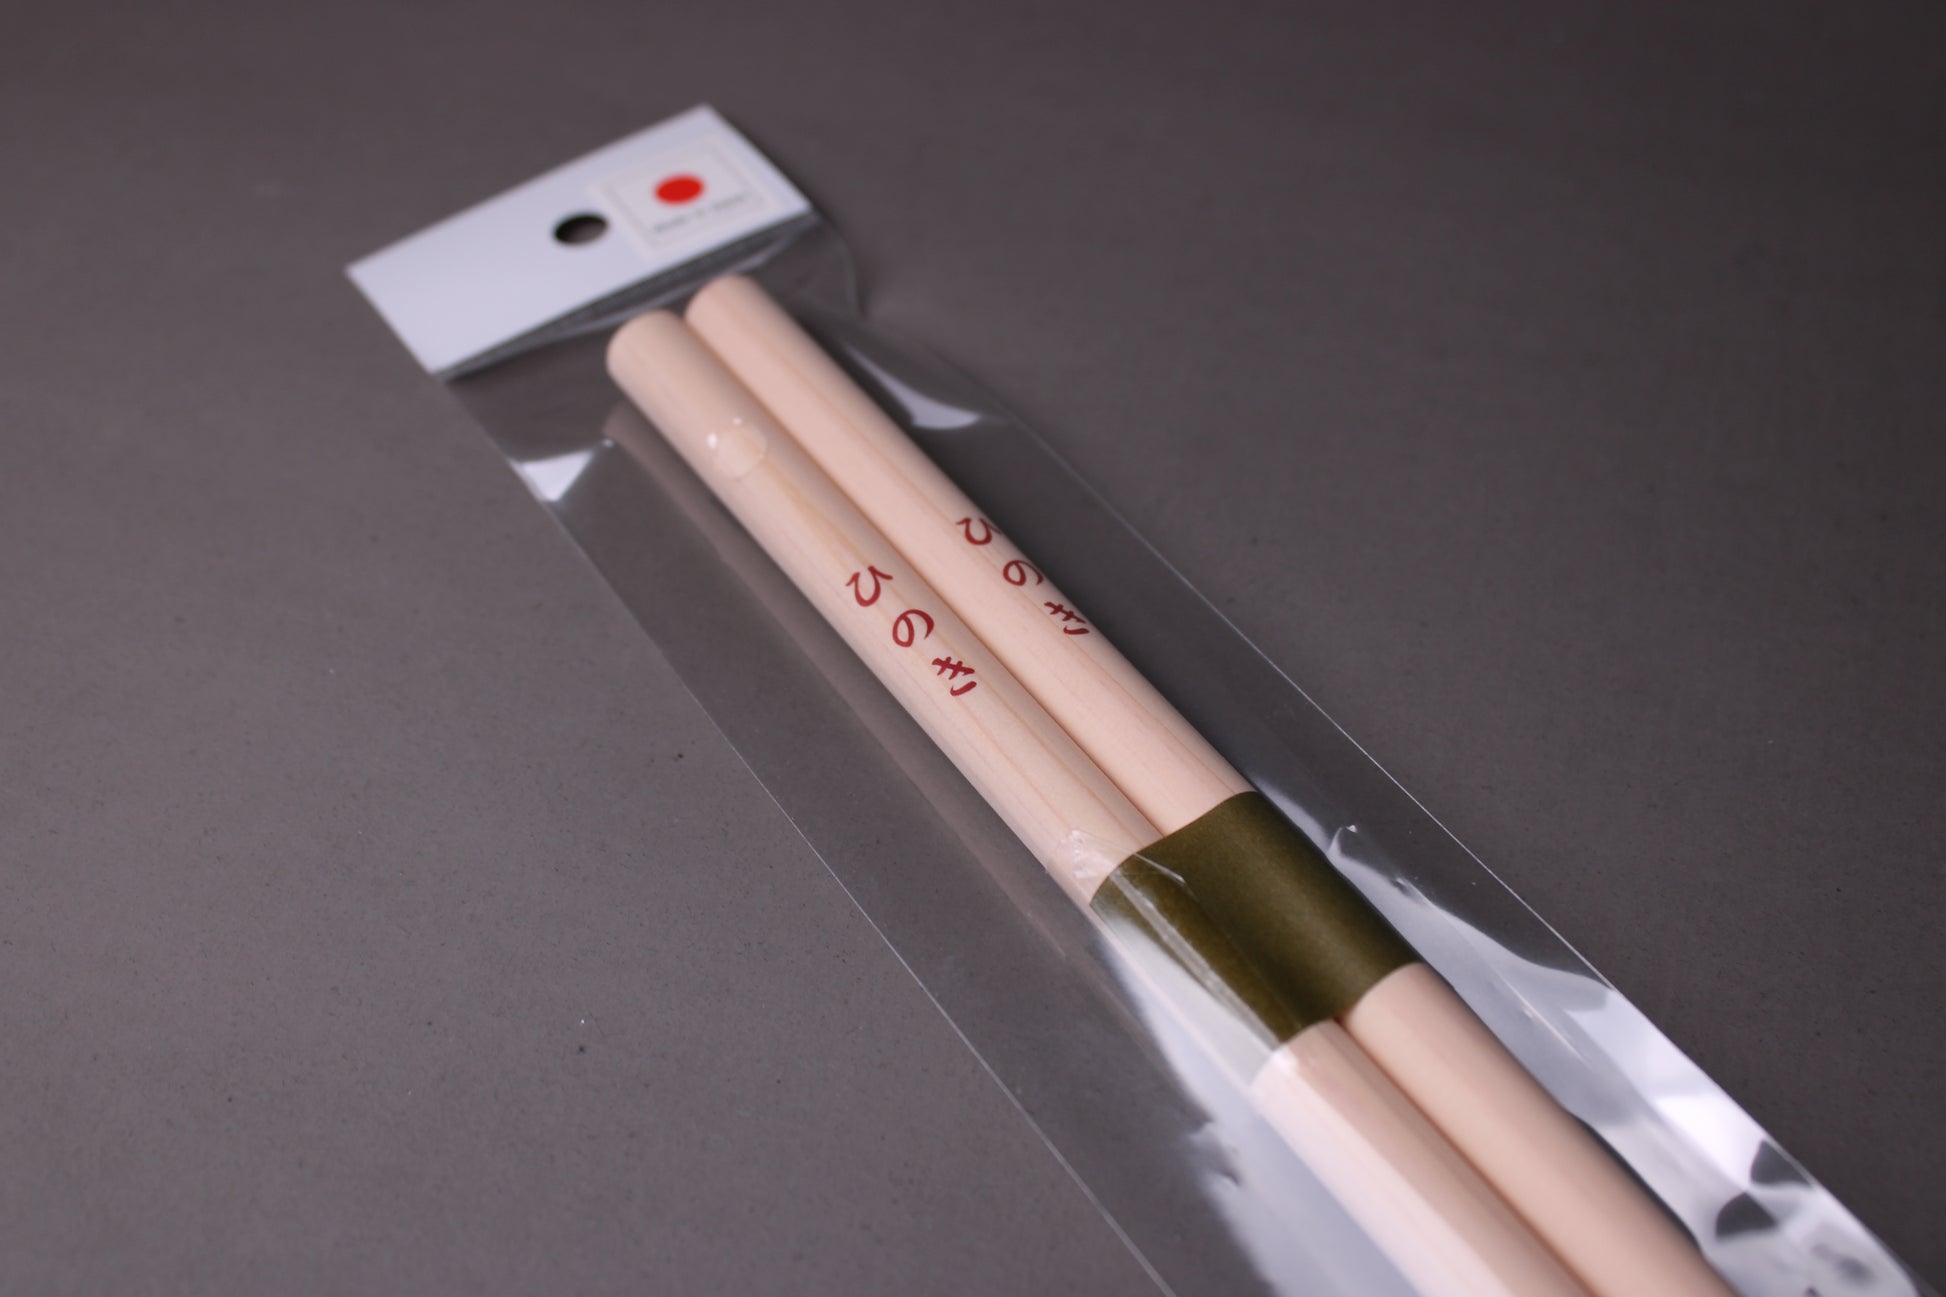  saibashi round cooking chopsticks by yamacoh youbi kisou life packed in clear plastic with red paper backing and sticker writing hinoki in hiragana with grey background closeup of chopsticks